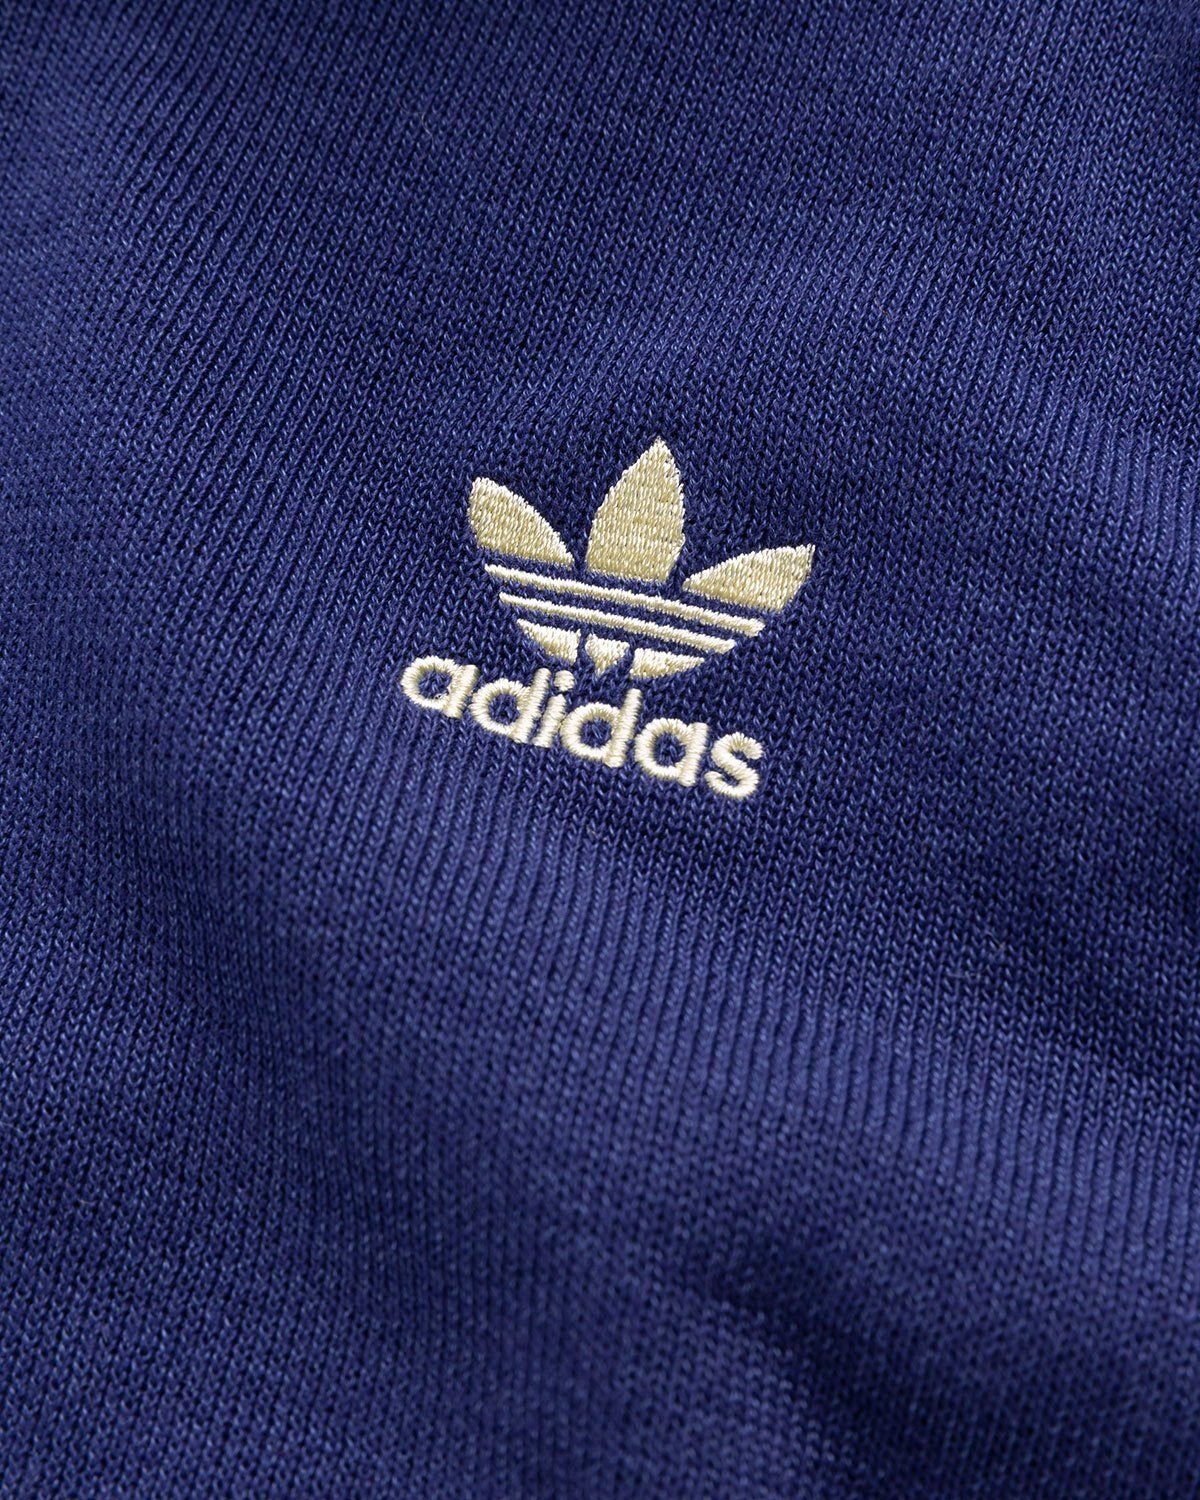 Adidas x Wales Bonner – 80s Track Top Night Sky - Outerwear - Blue - Image 4